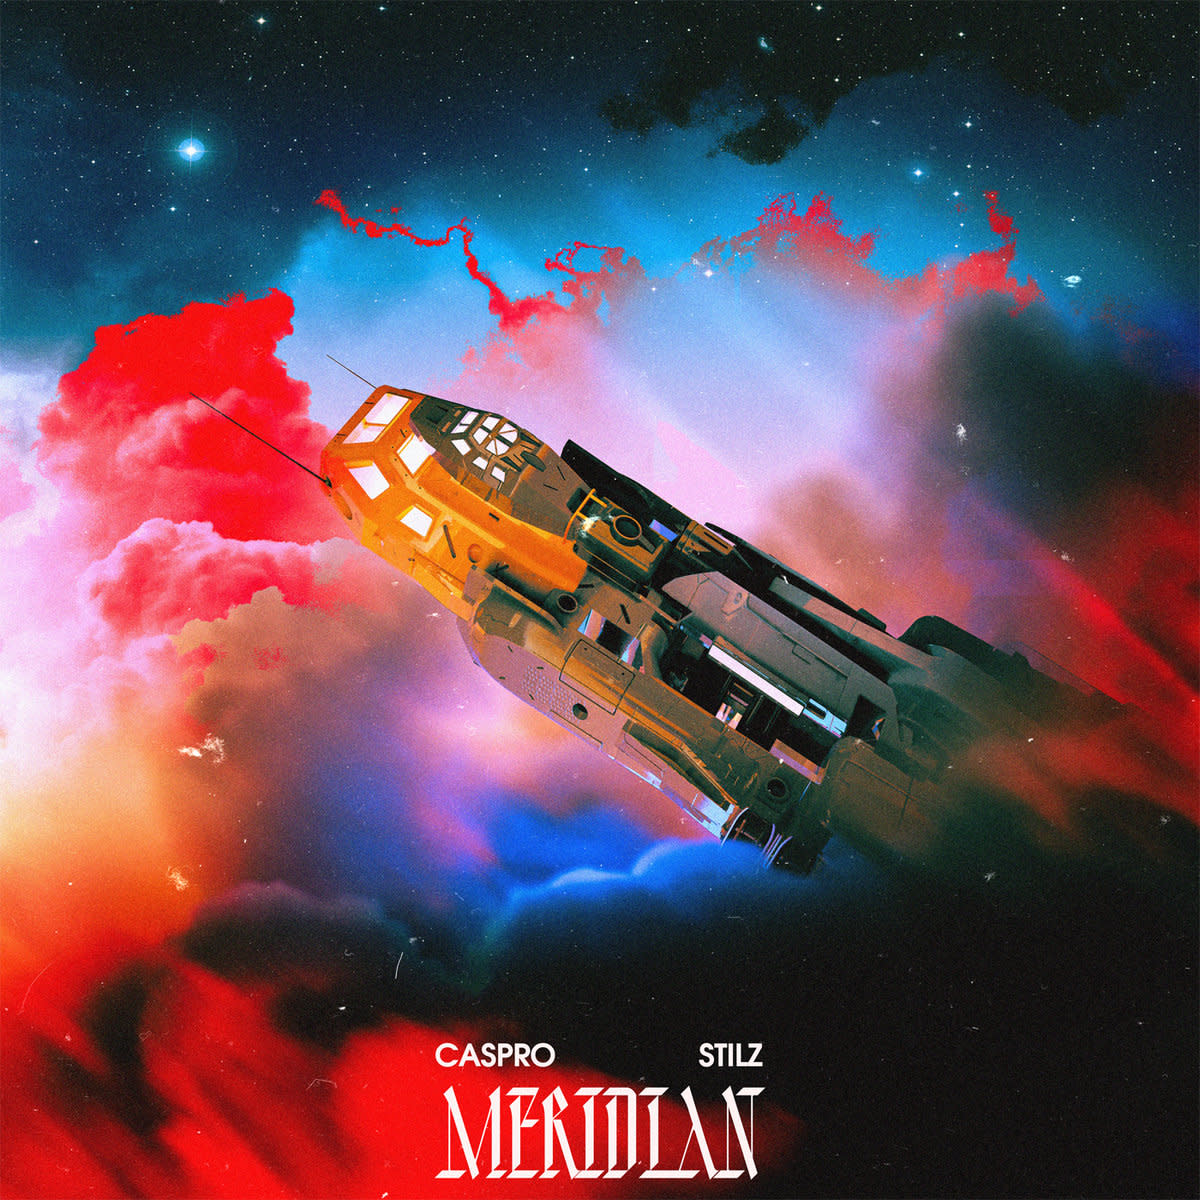 Synth EP Review: “Meridian’’ by Caspro & Stilz